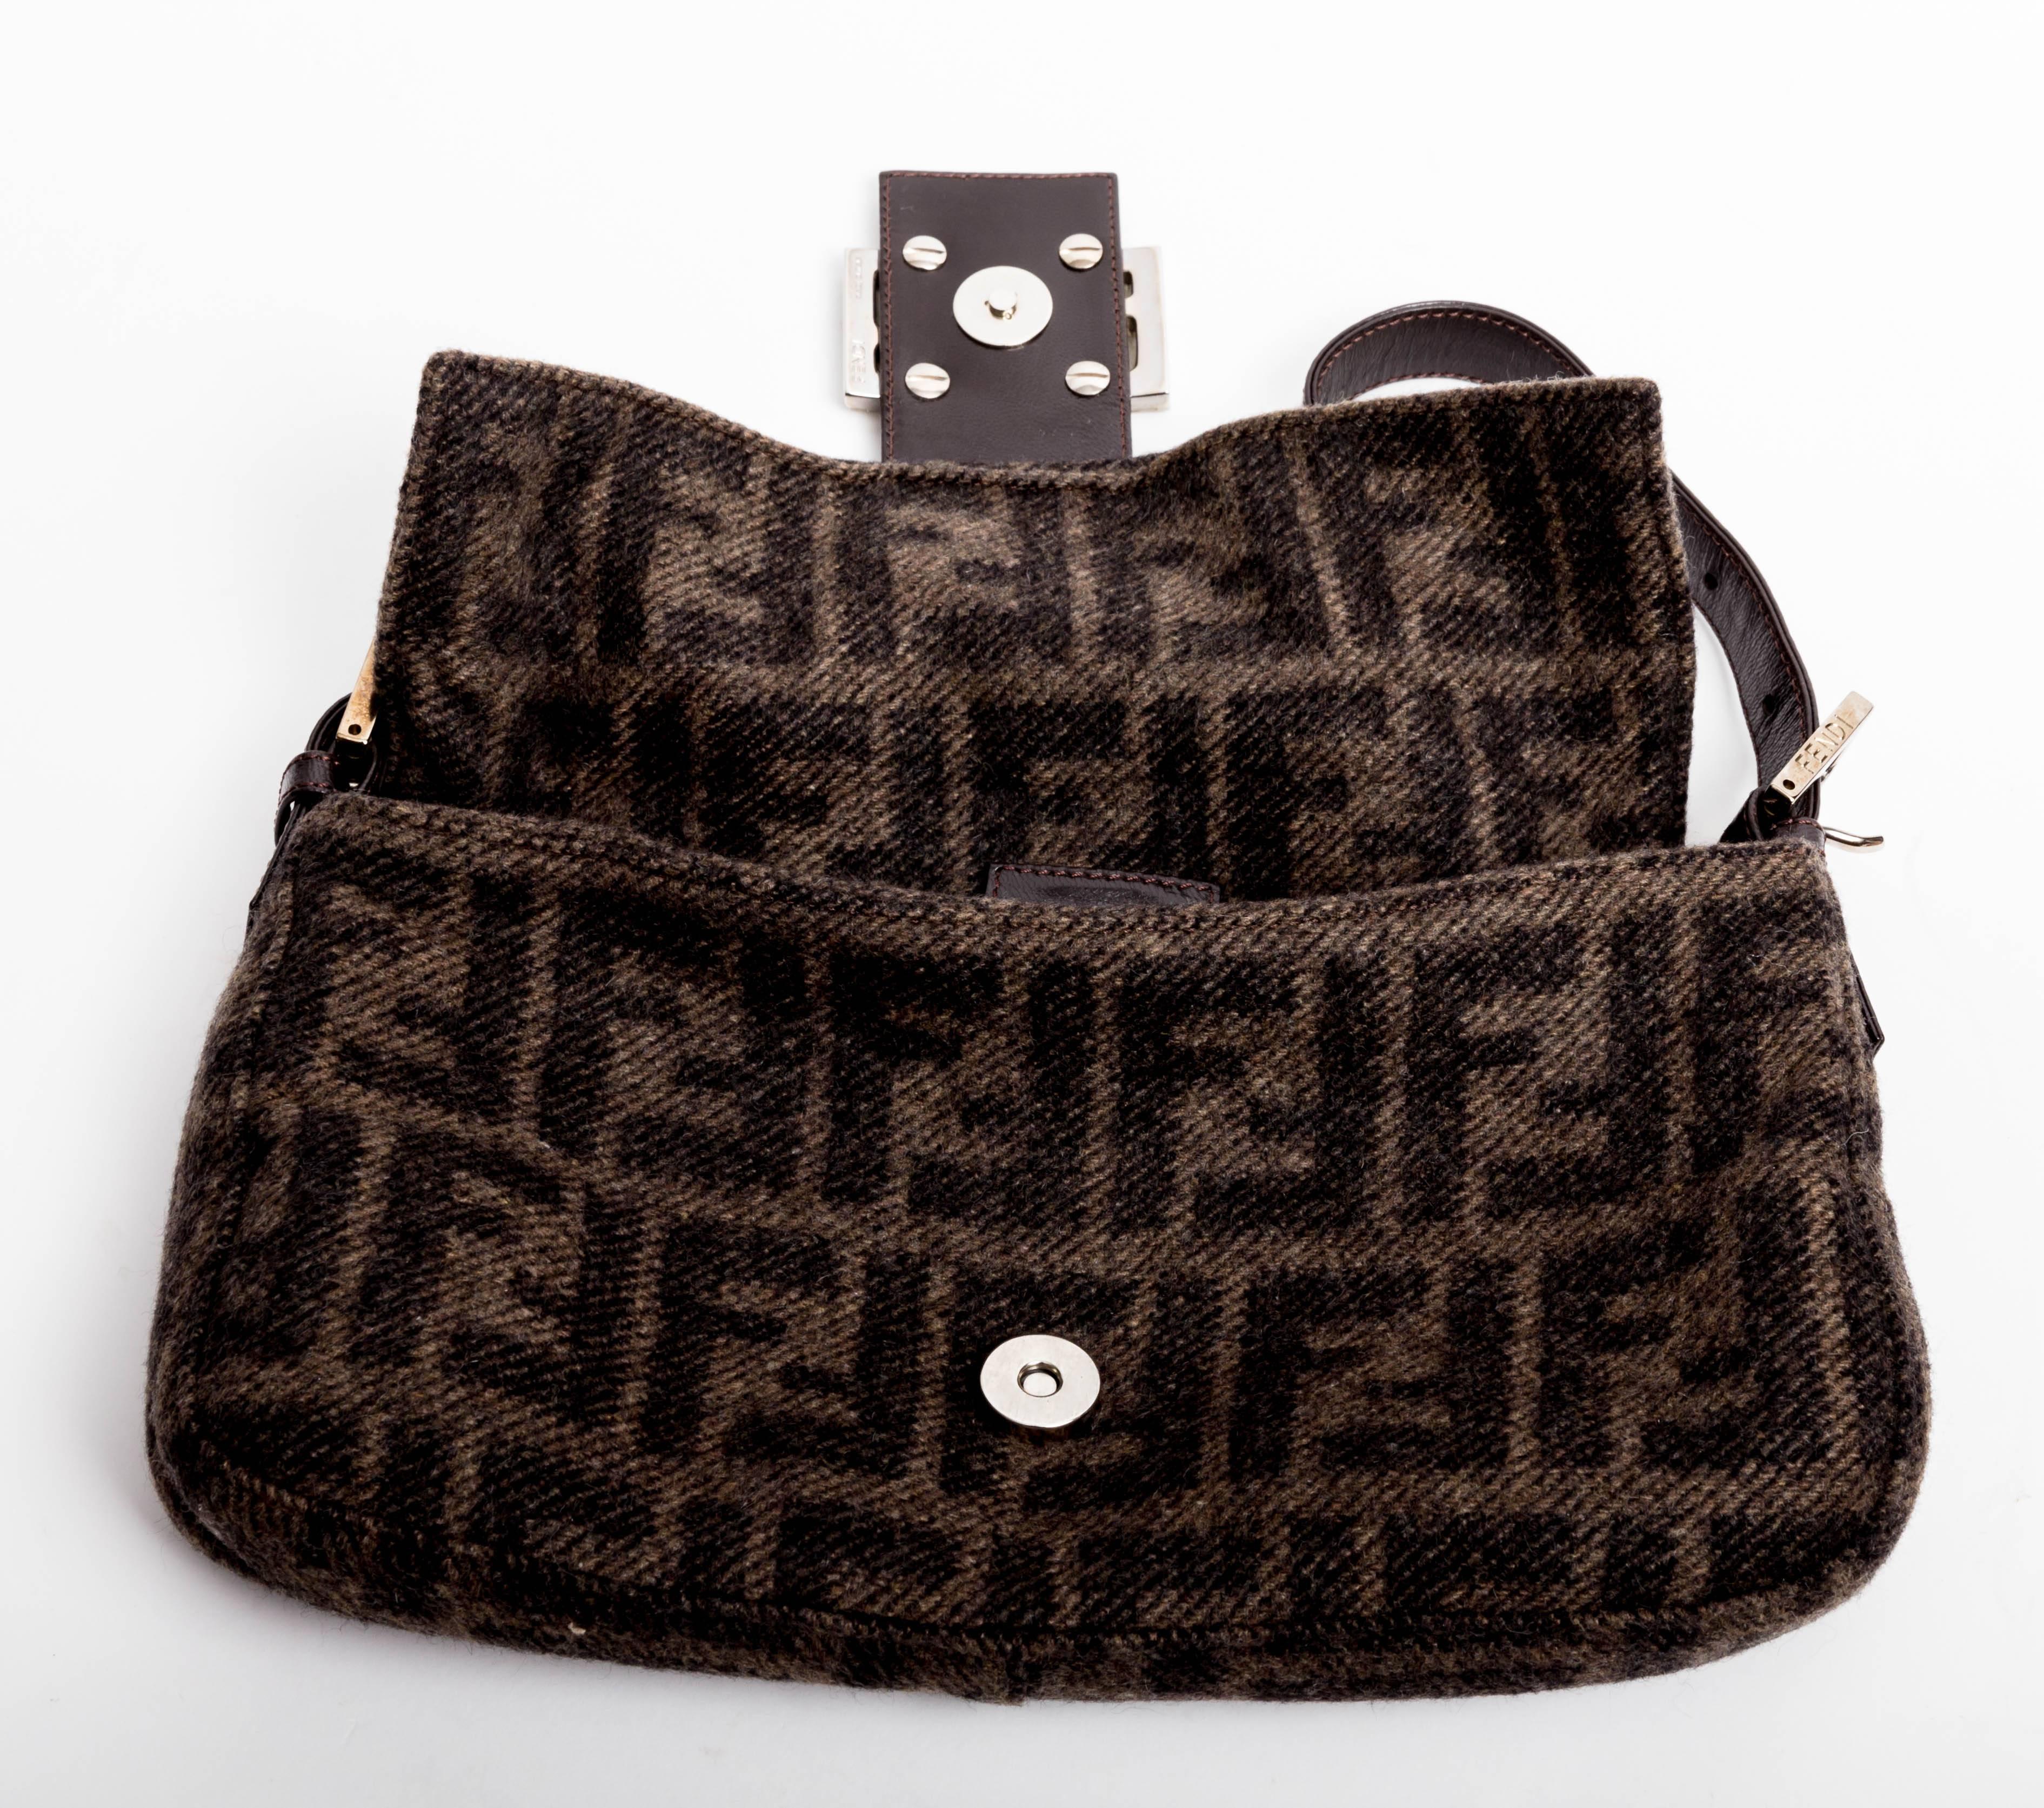 Fendi Cashmere Logo Baguette with Brown Leather Handle 2